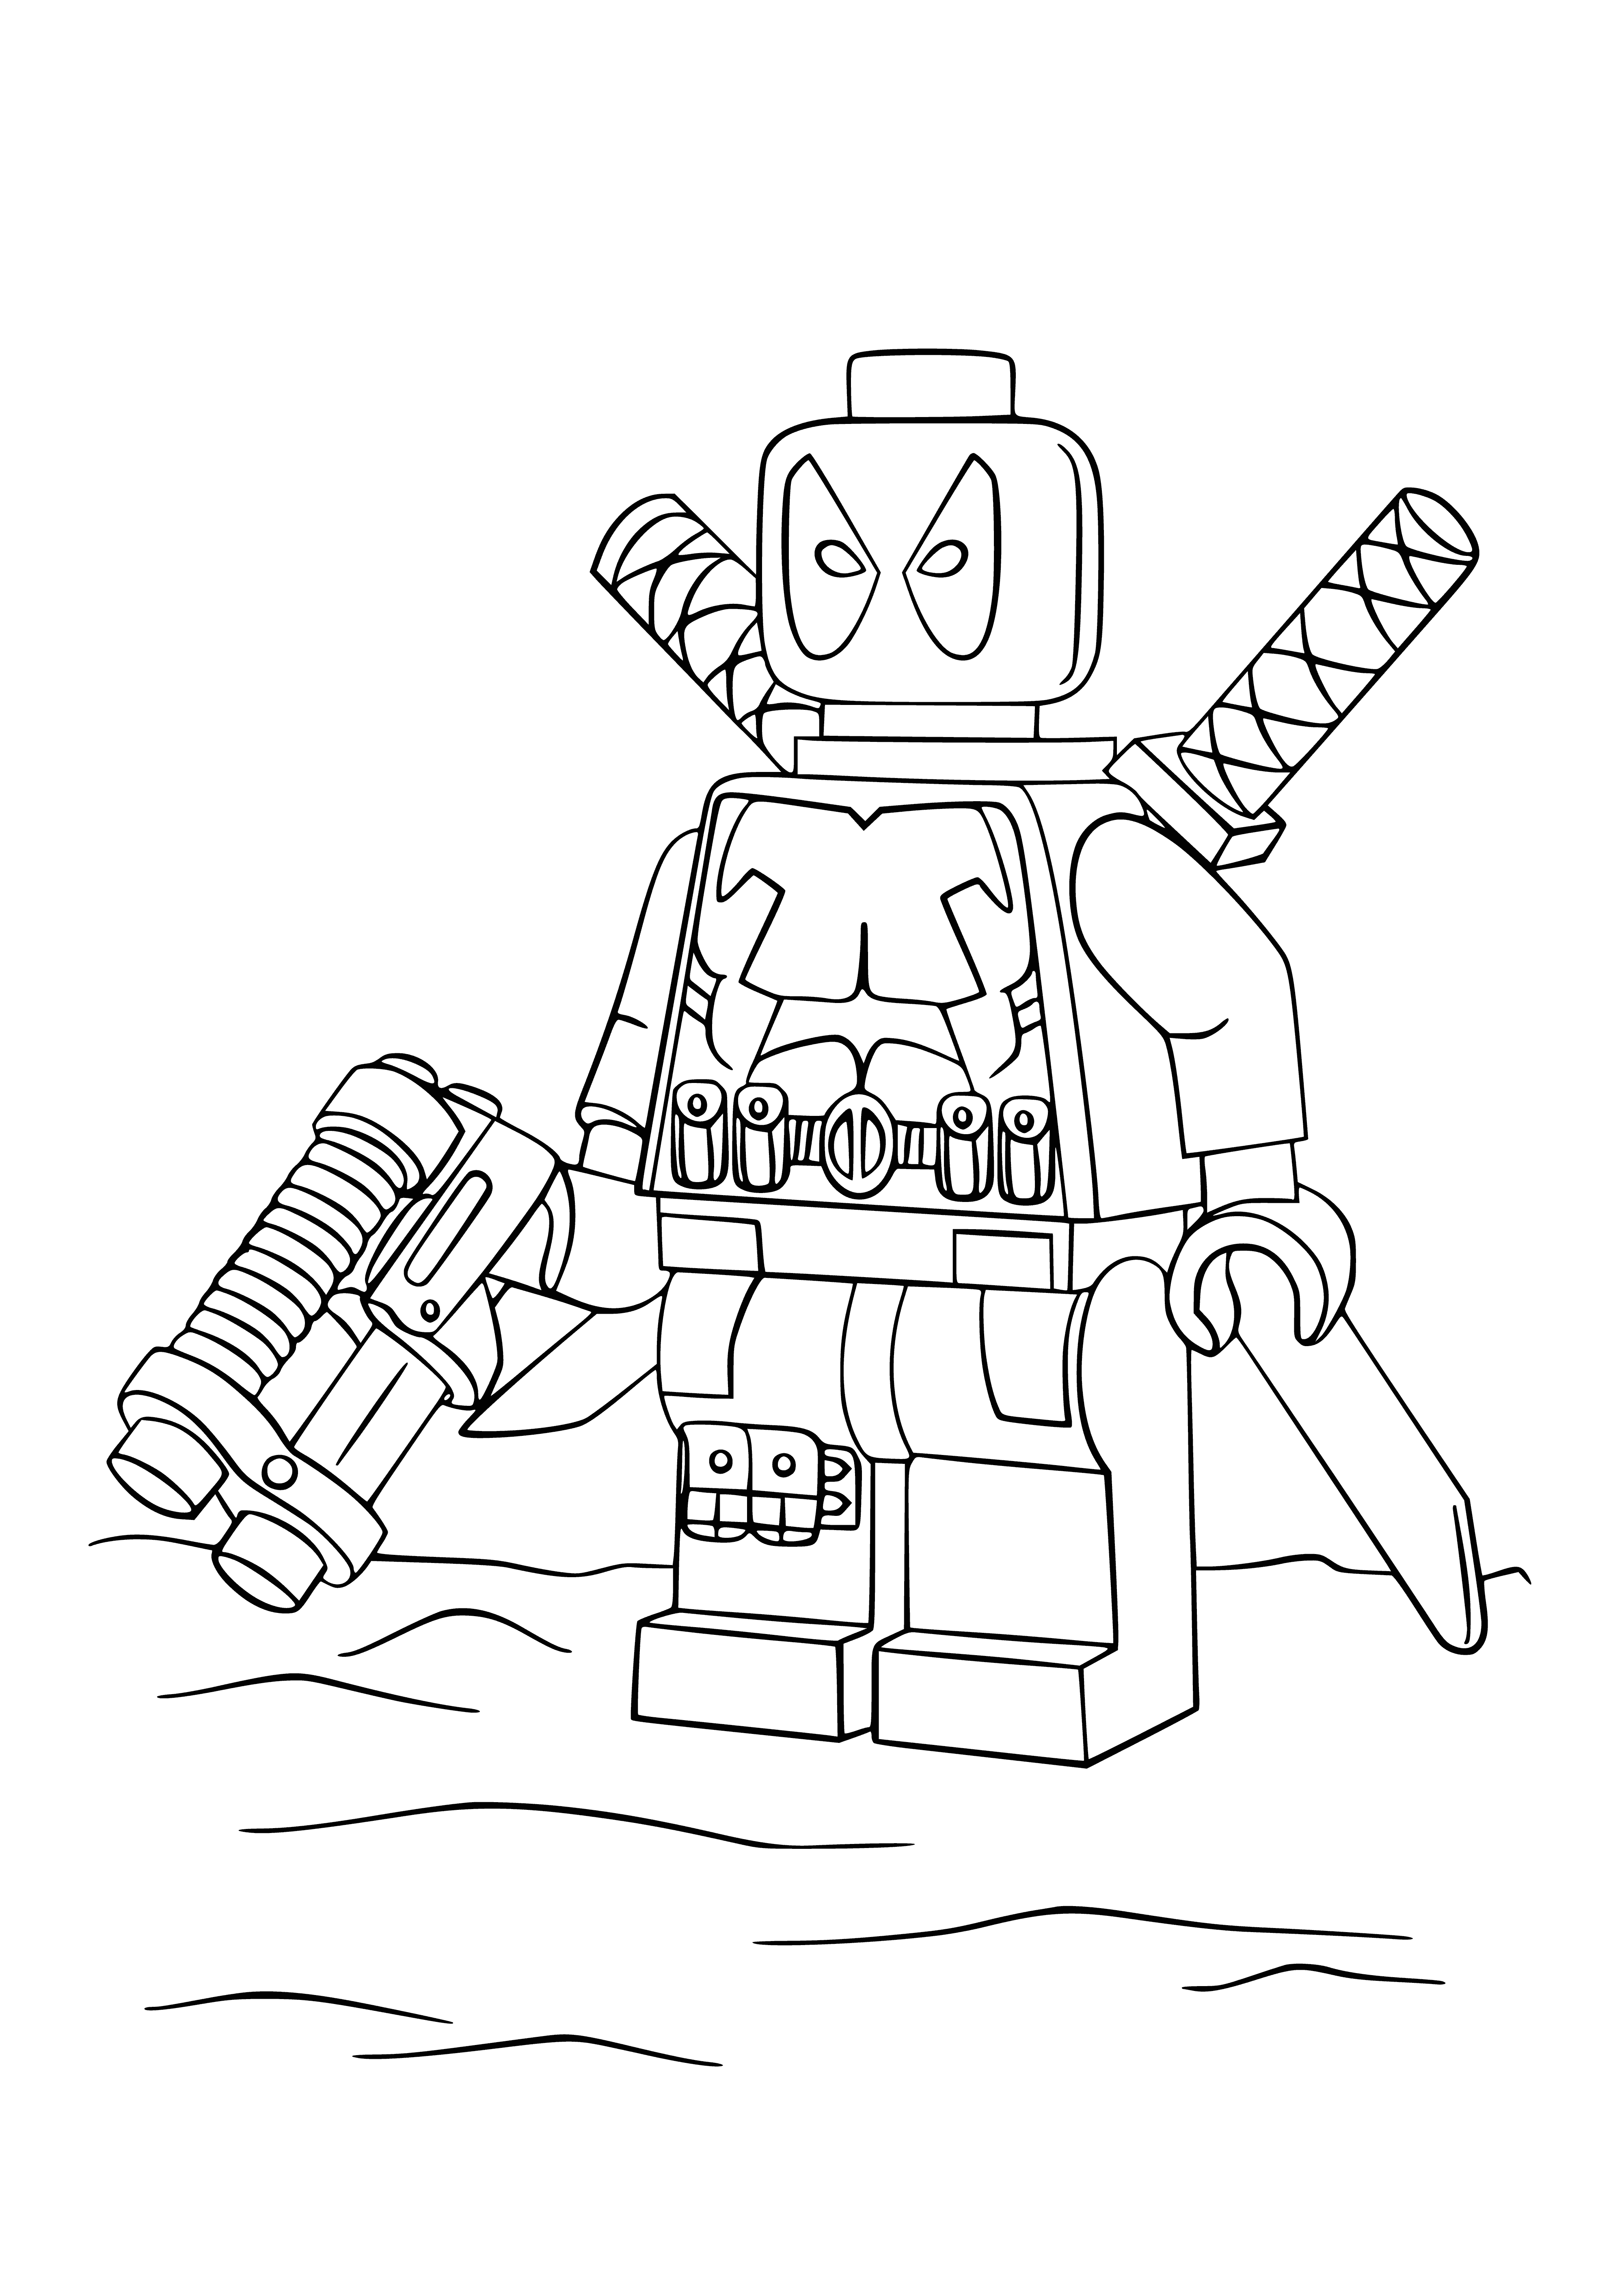 coloring page: Deadpool minifigure stands in a Lego cityscape, wearing red/black mask & suit, white eyes & open smile, swords crossed in front of him. #Lego #Marvel